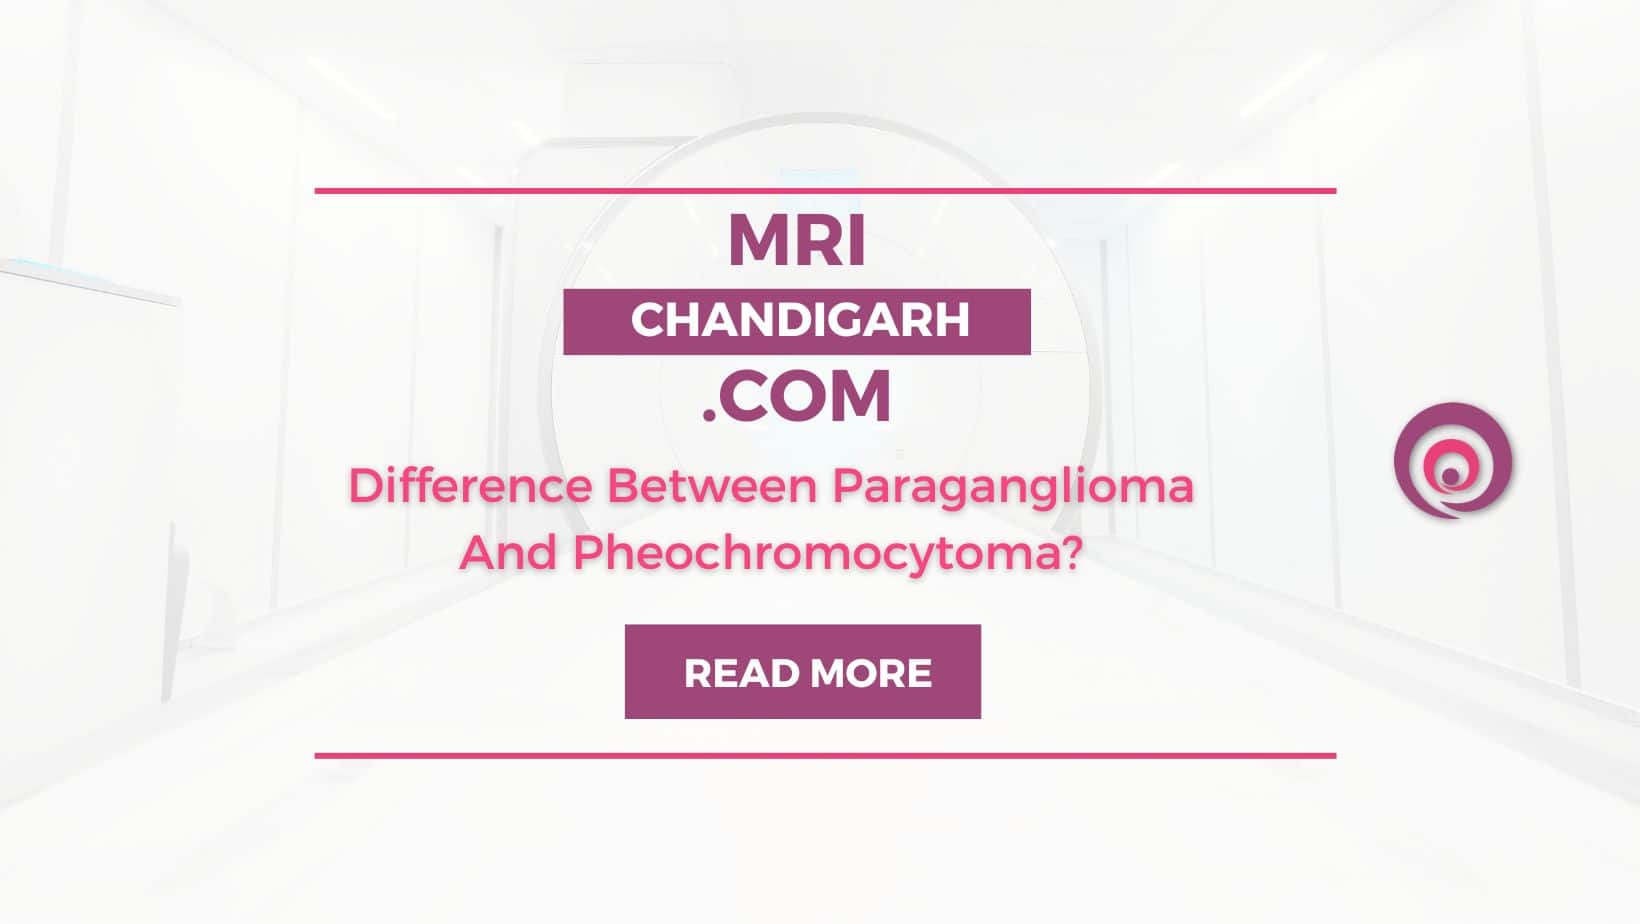 What Is The Difference Between Paraganglioma And Pheochromocytoma?